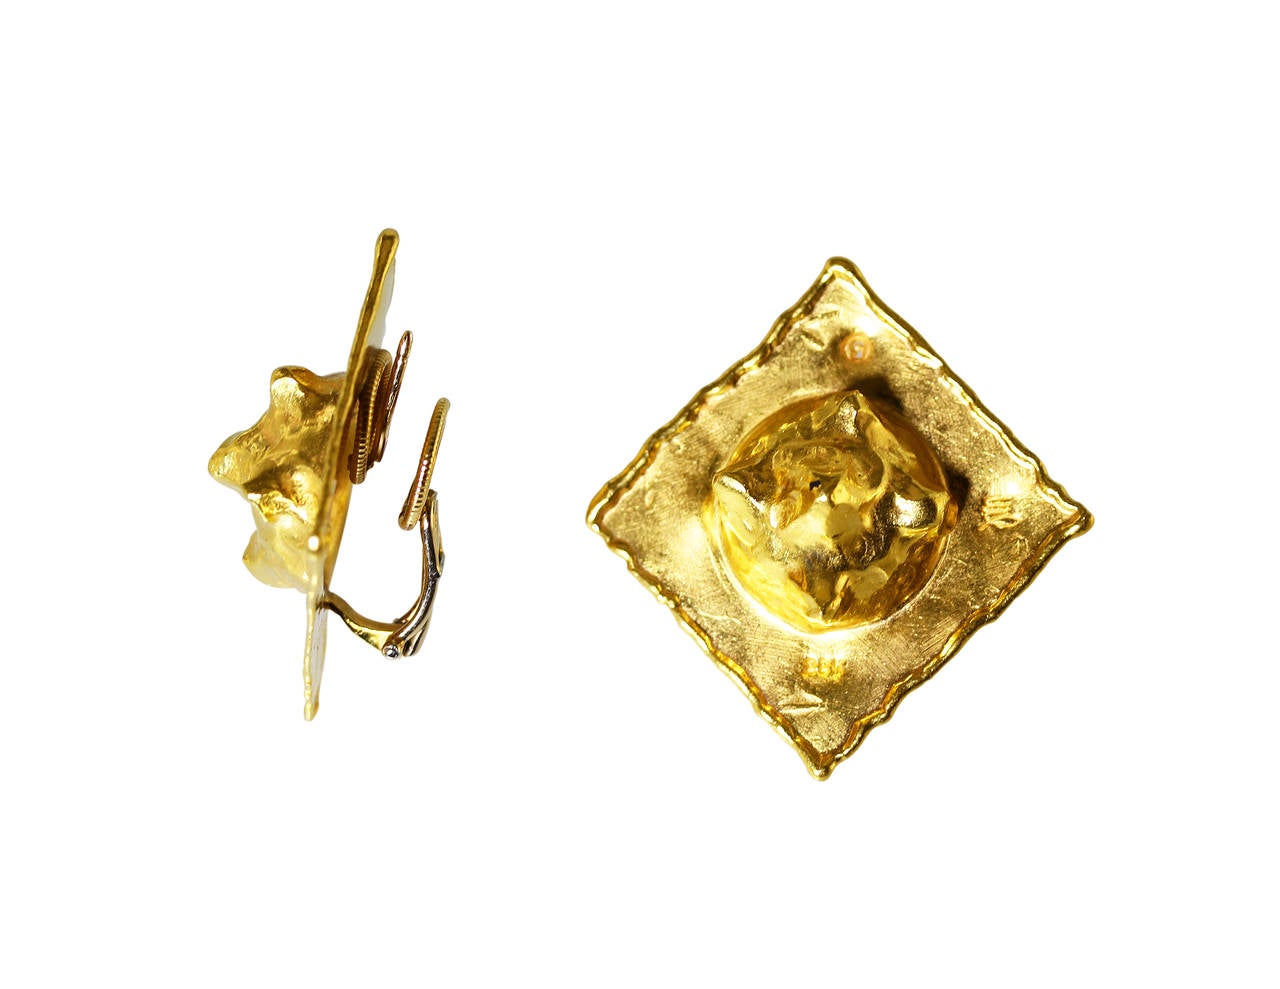 Pair of 22 karat yellow gold earclips by Jean Mahie, of square design with textured bombe centers, gross weight 20.5 grams, measuring approximately 1 by 1 inch, with maker's mark JM for Jean Mahie, stamped 22K.  A unique pair of earclips with depth